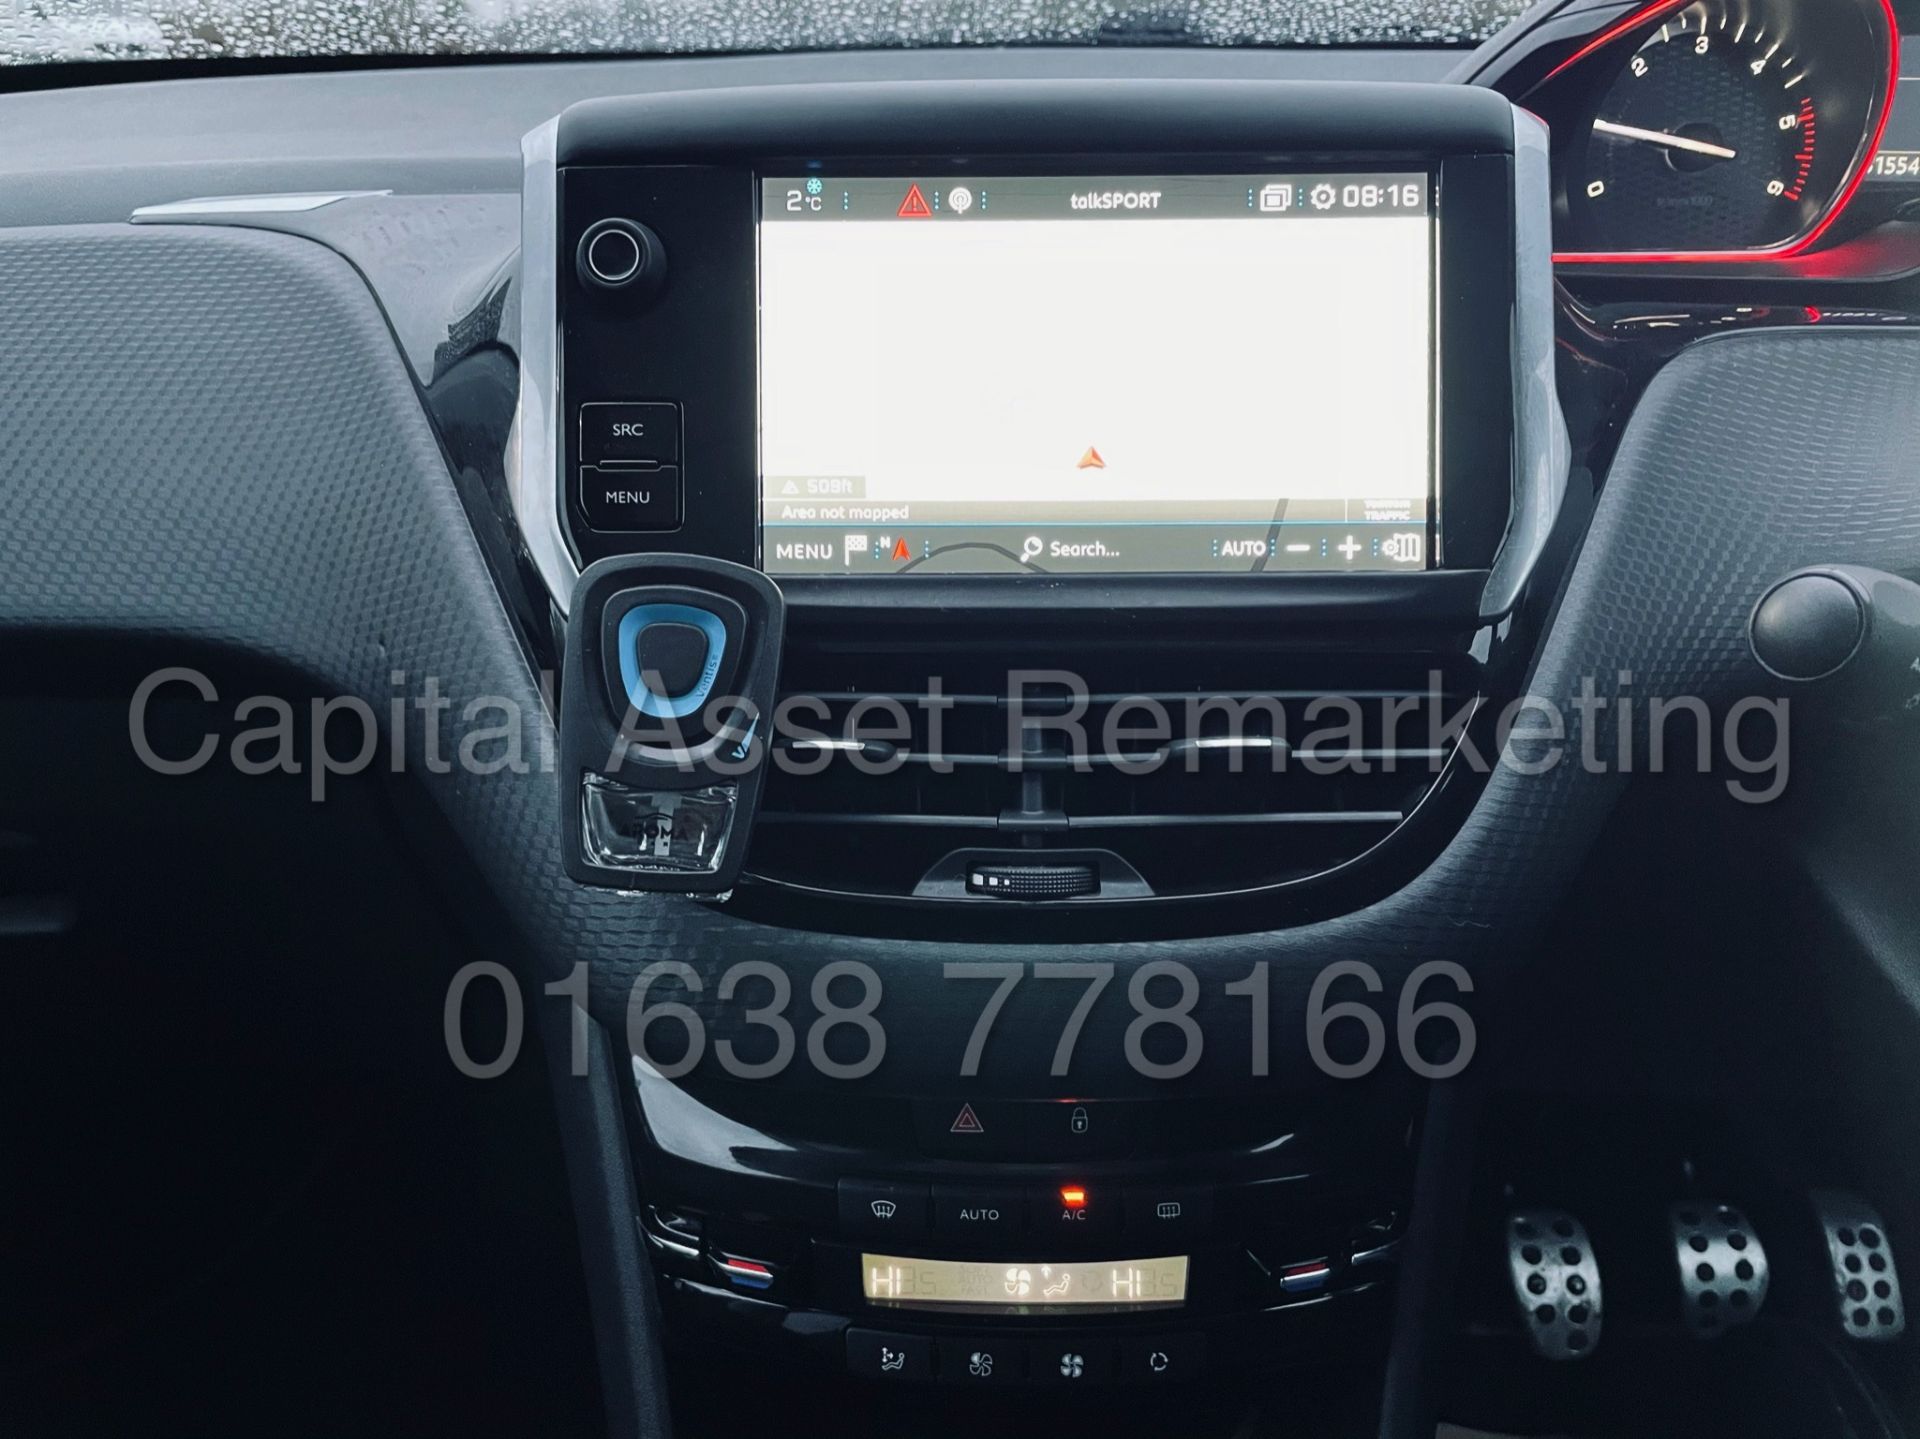 PEUGEOT 2008 *GT LINE* SUV / MPV (2019 - EURO 6) '1.5 BLUE HDI' *SAT NAV - PAN ROOF' *LOW MILES* - Image 39 of 46